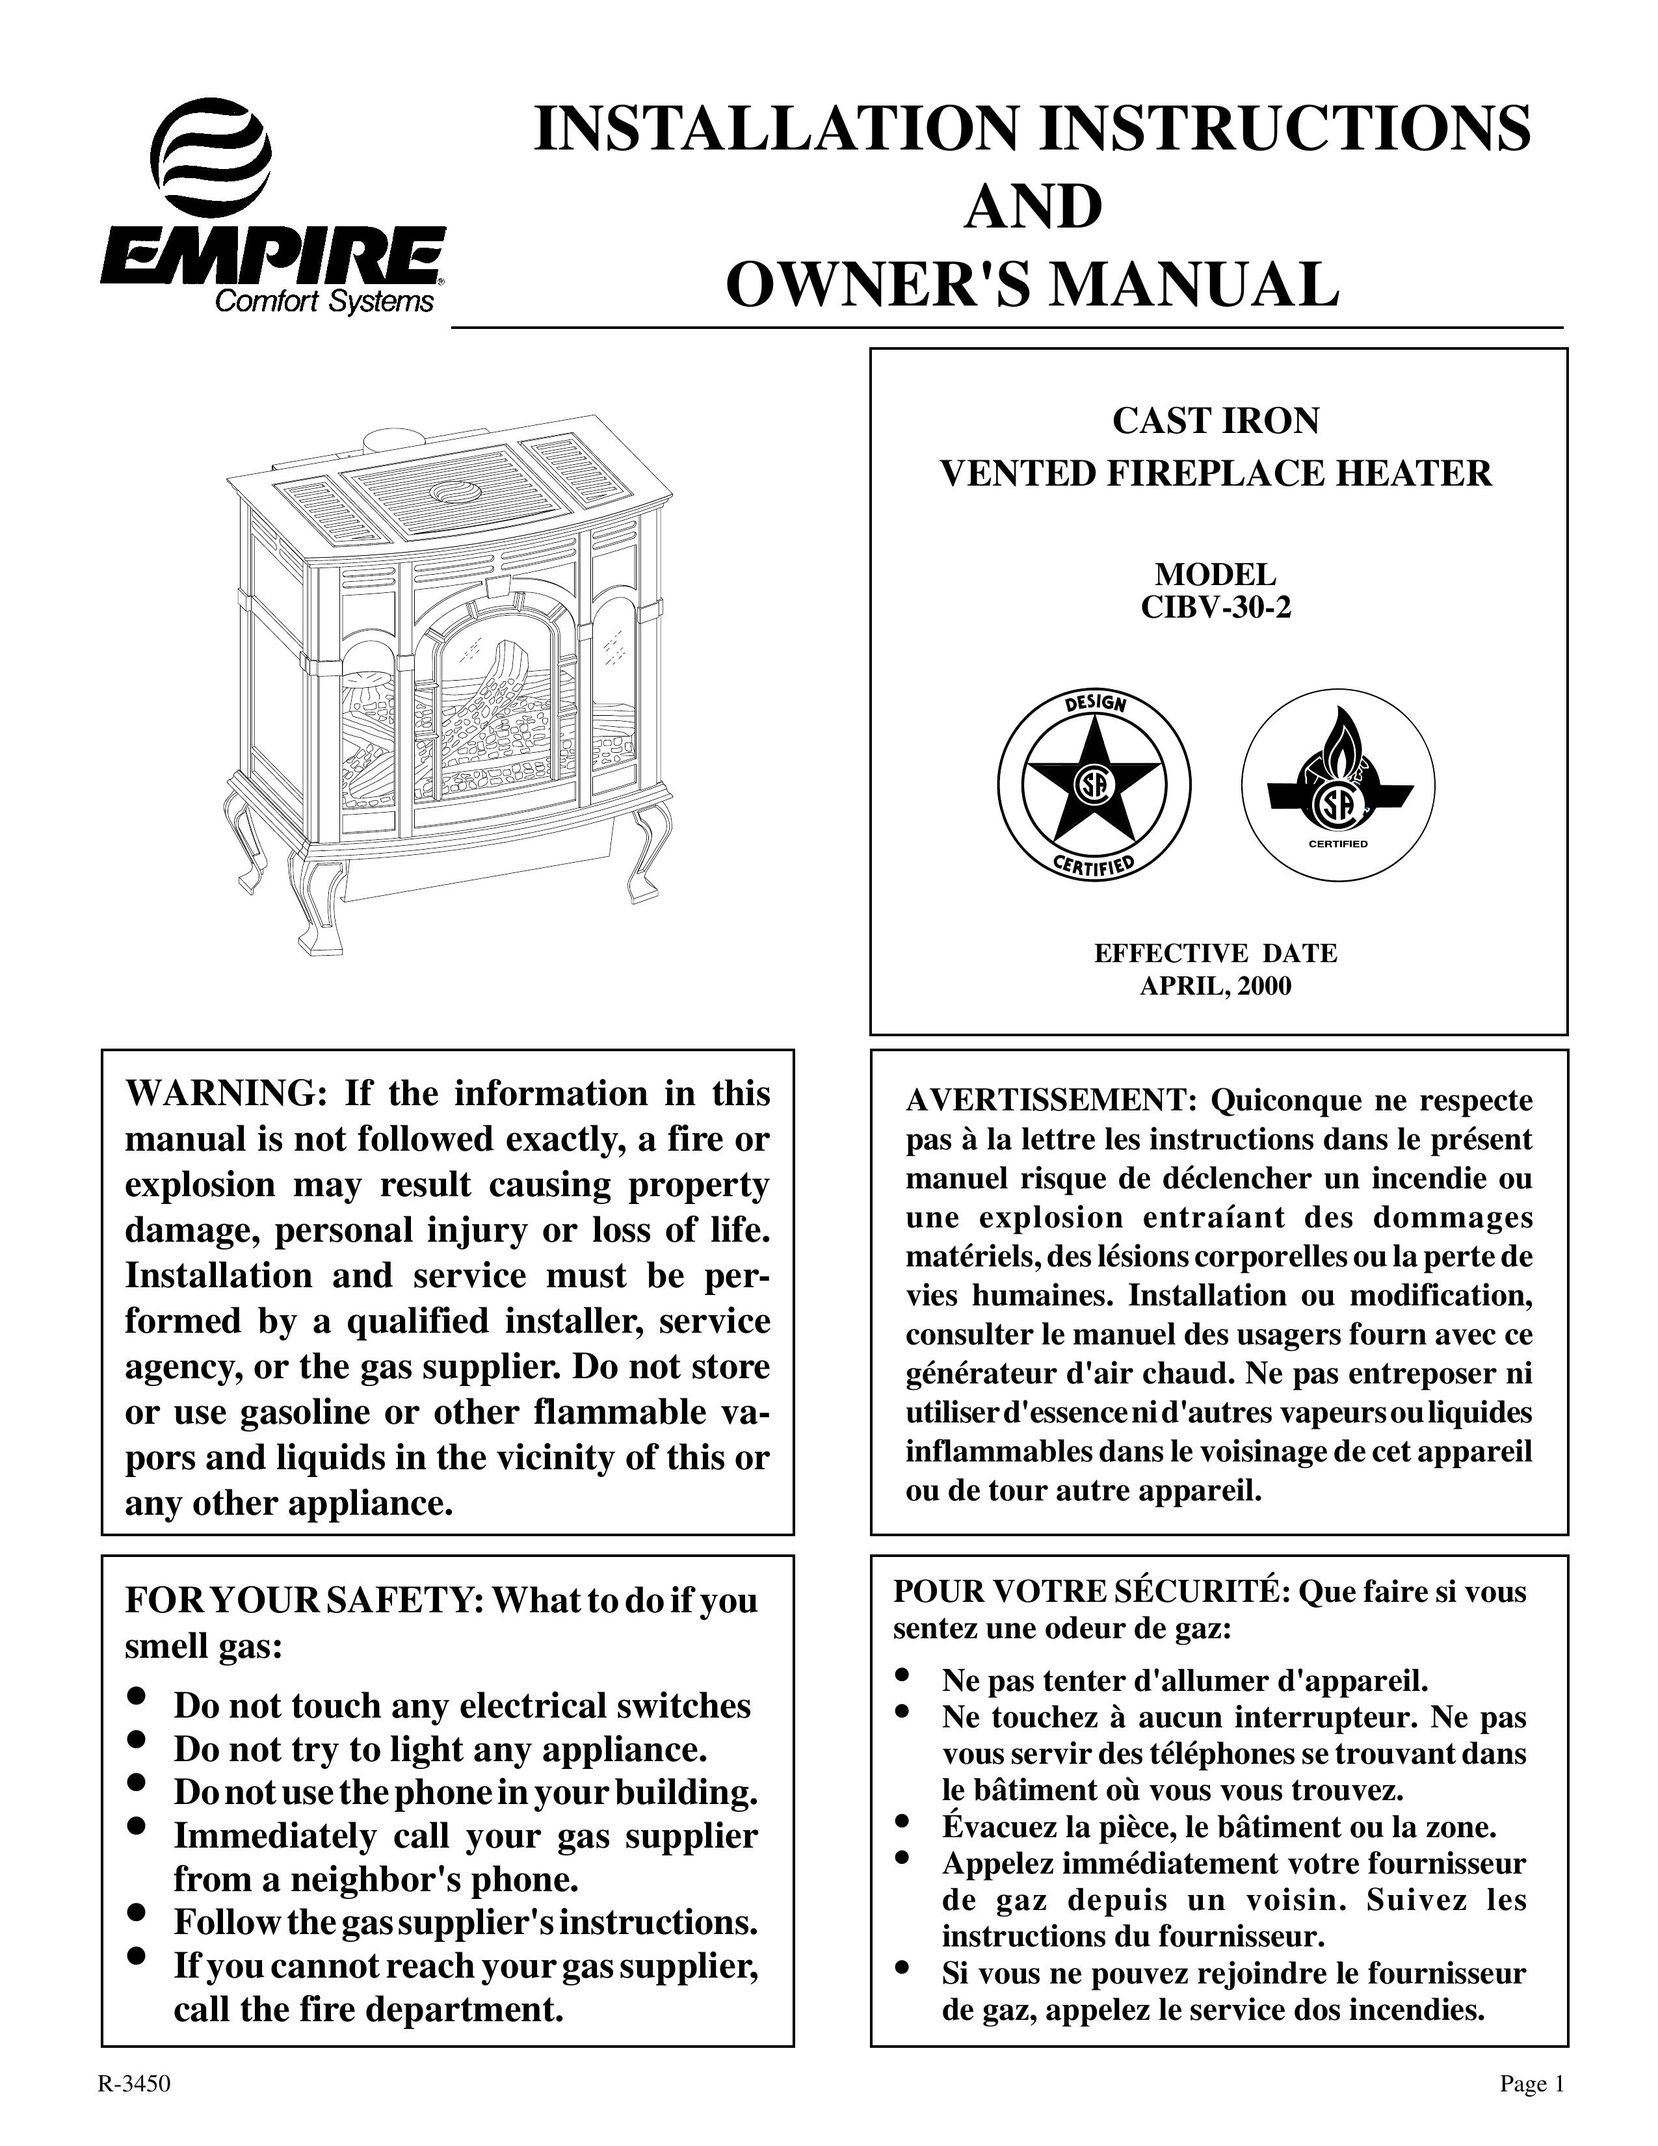 Empire Comfort Systems CIBV-30-2 Indoor Fireplace User Manual